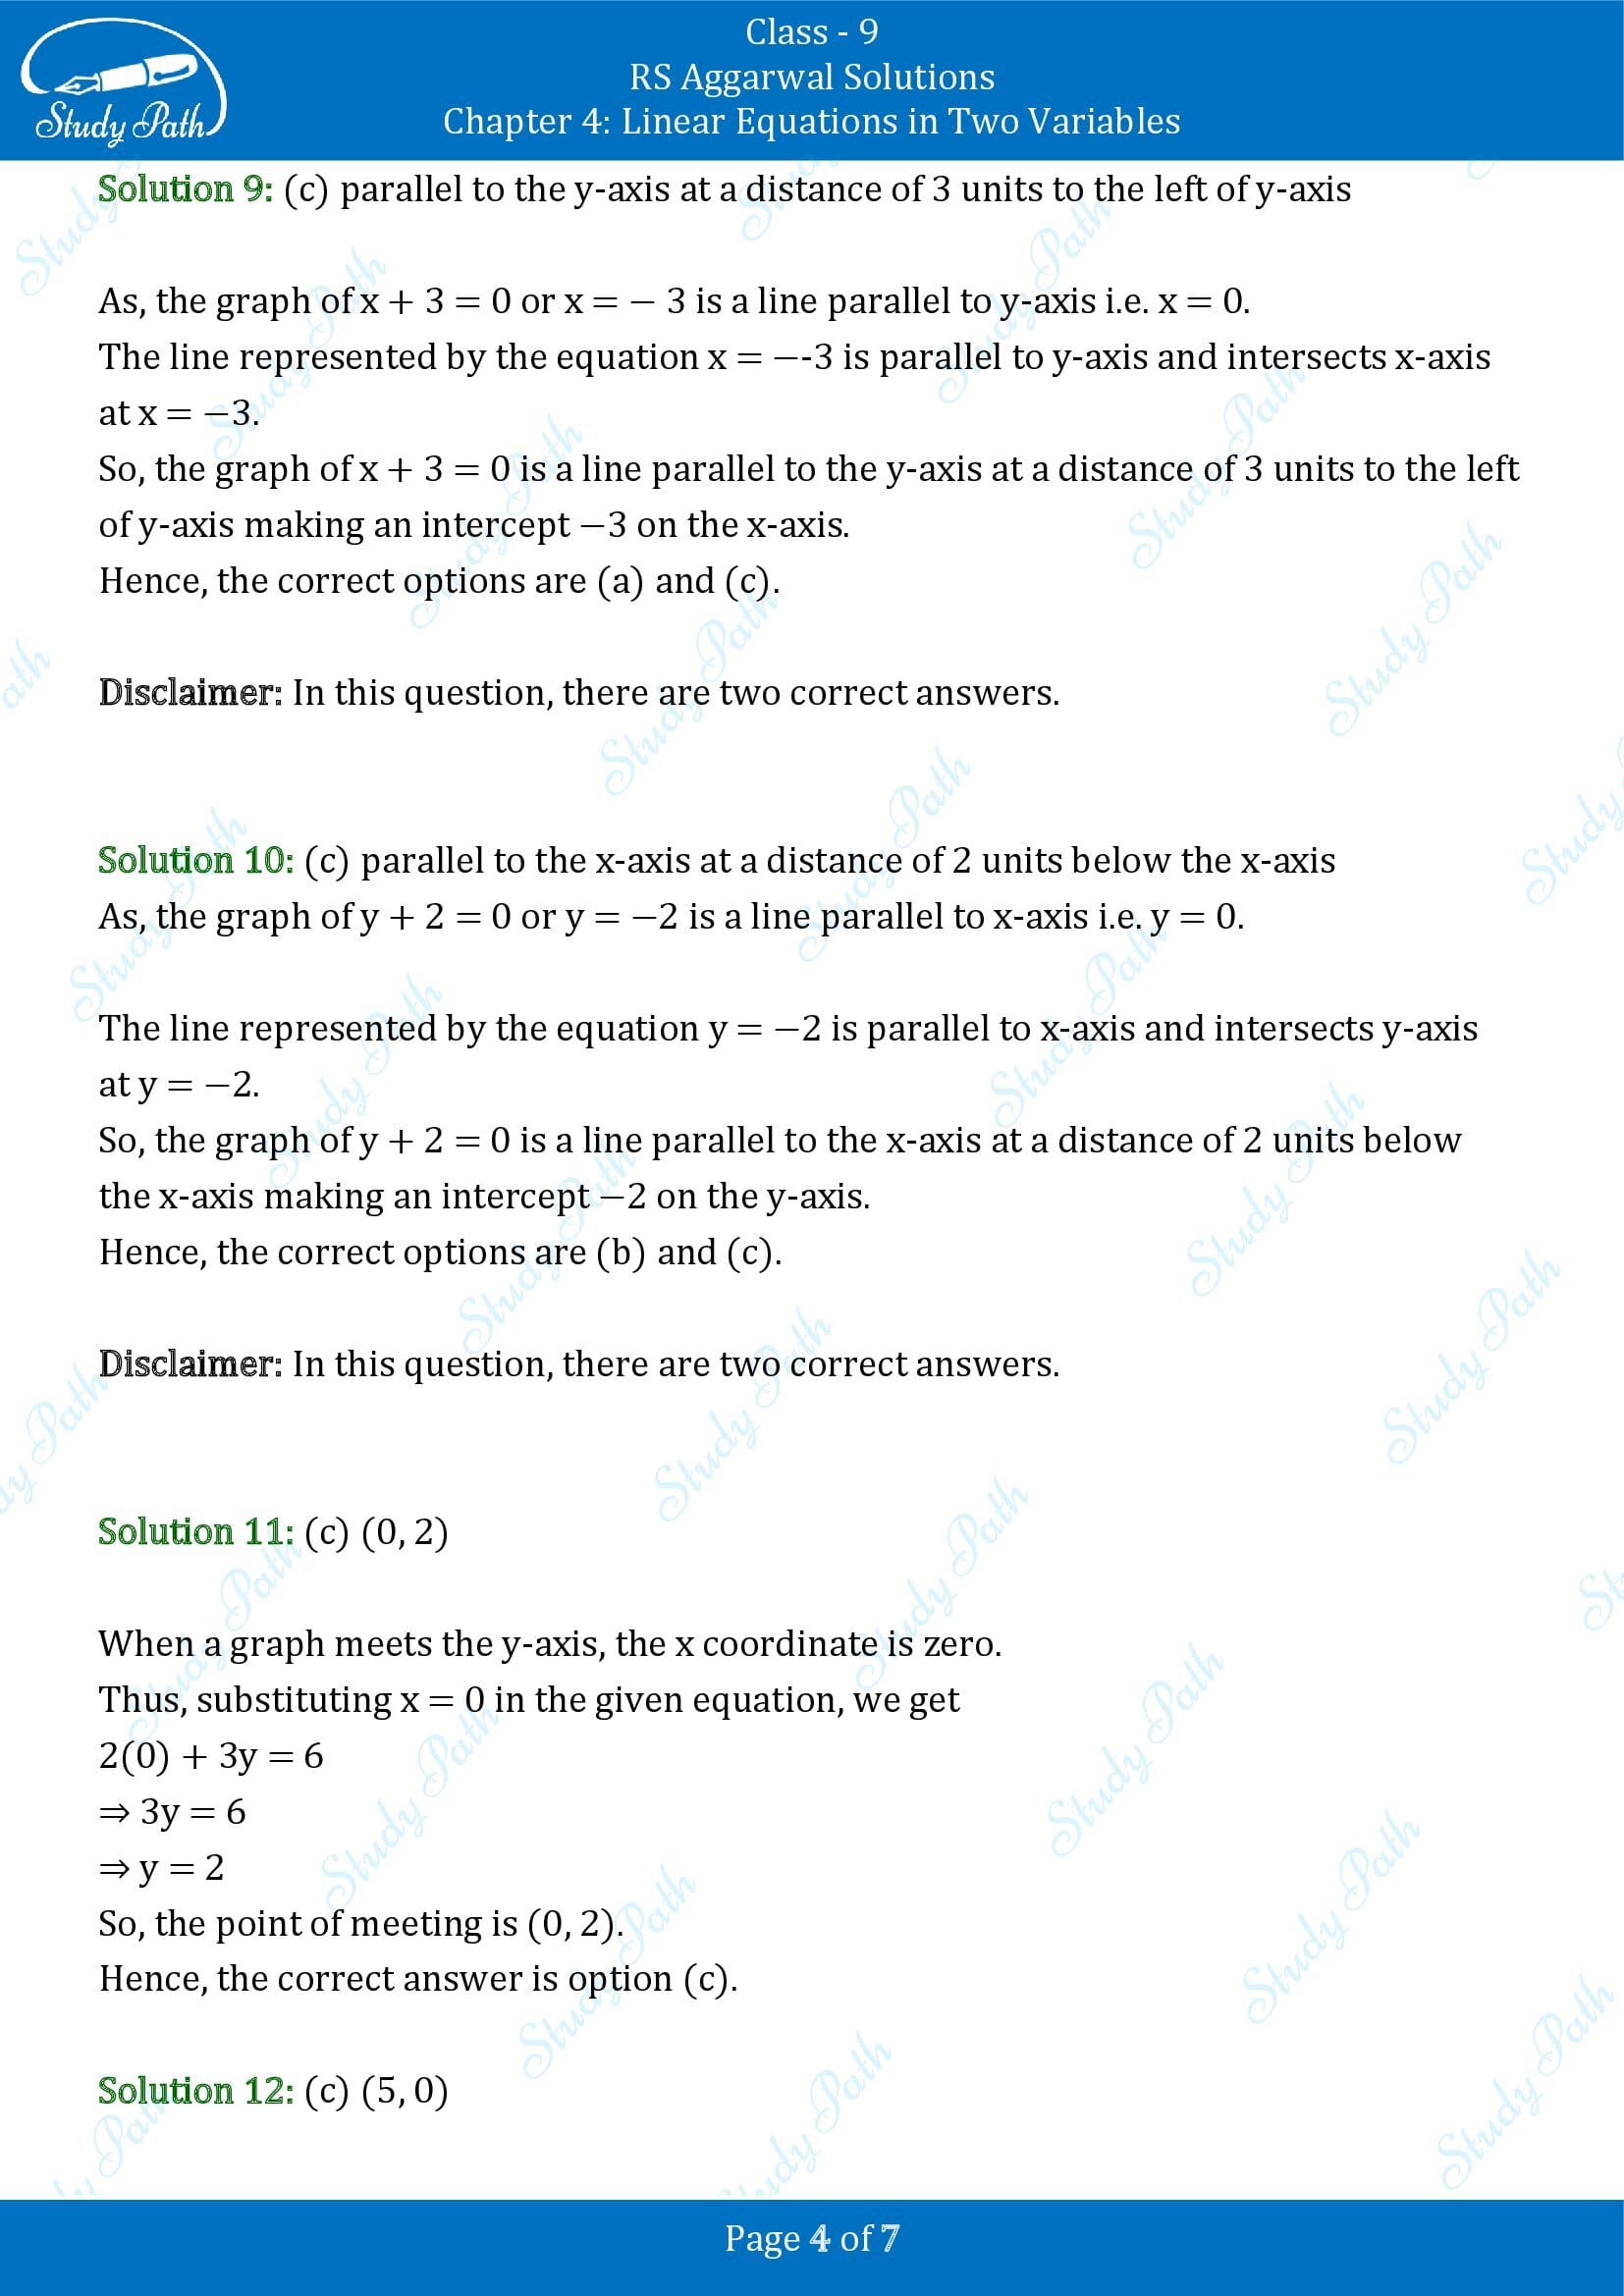 RS Aggarwal Solutions Class 9 Chapter 4 Linear Equations in Two Variables Multiple Choice Questions MCQs 00004